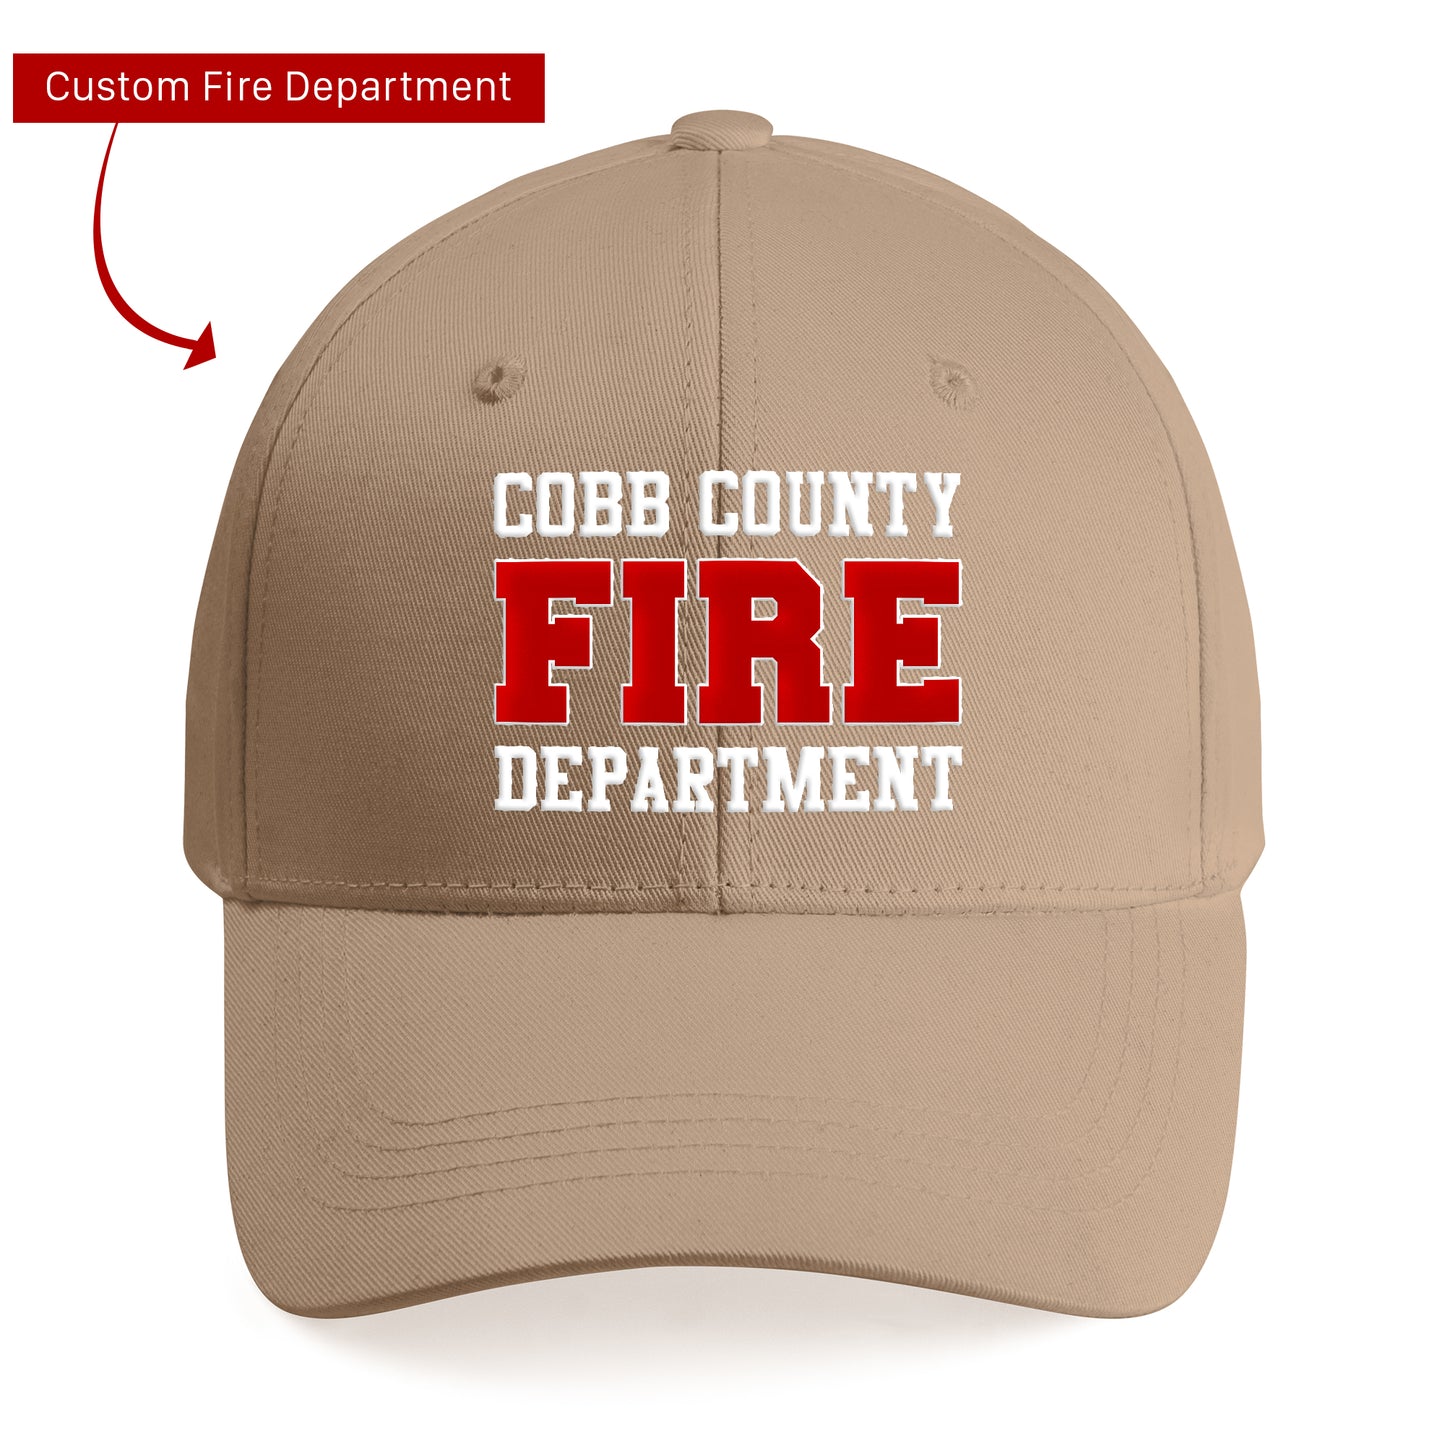 Custom Fire Department Embroidered Cap